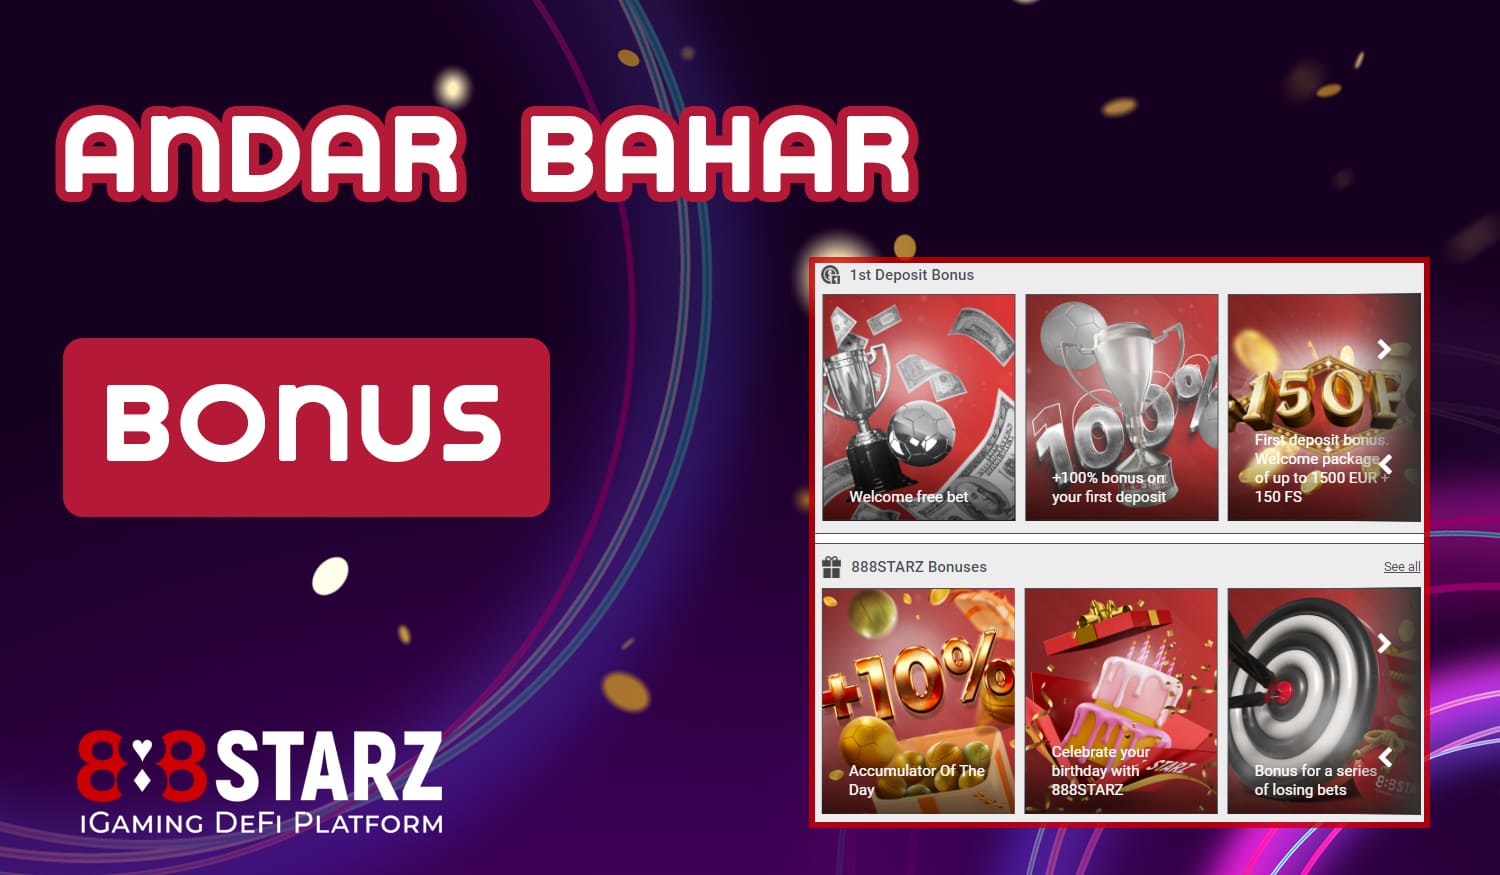 List of bonuses available at 888Starz casino for Indian users